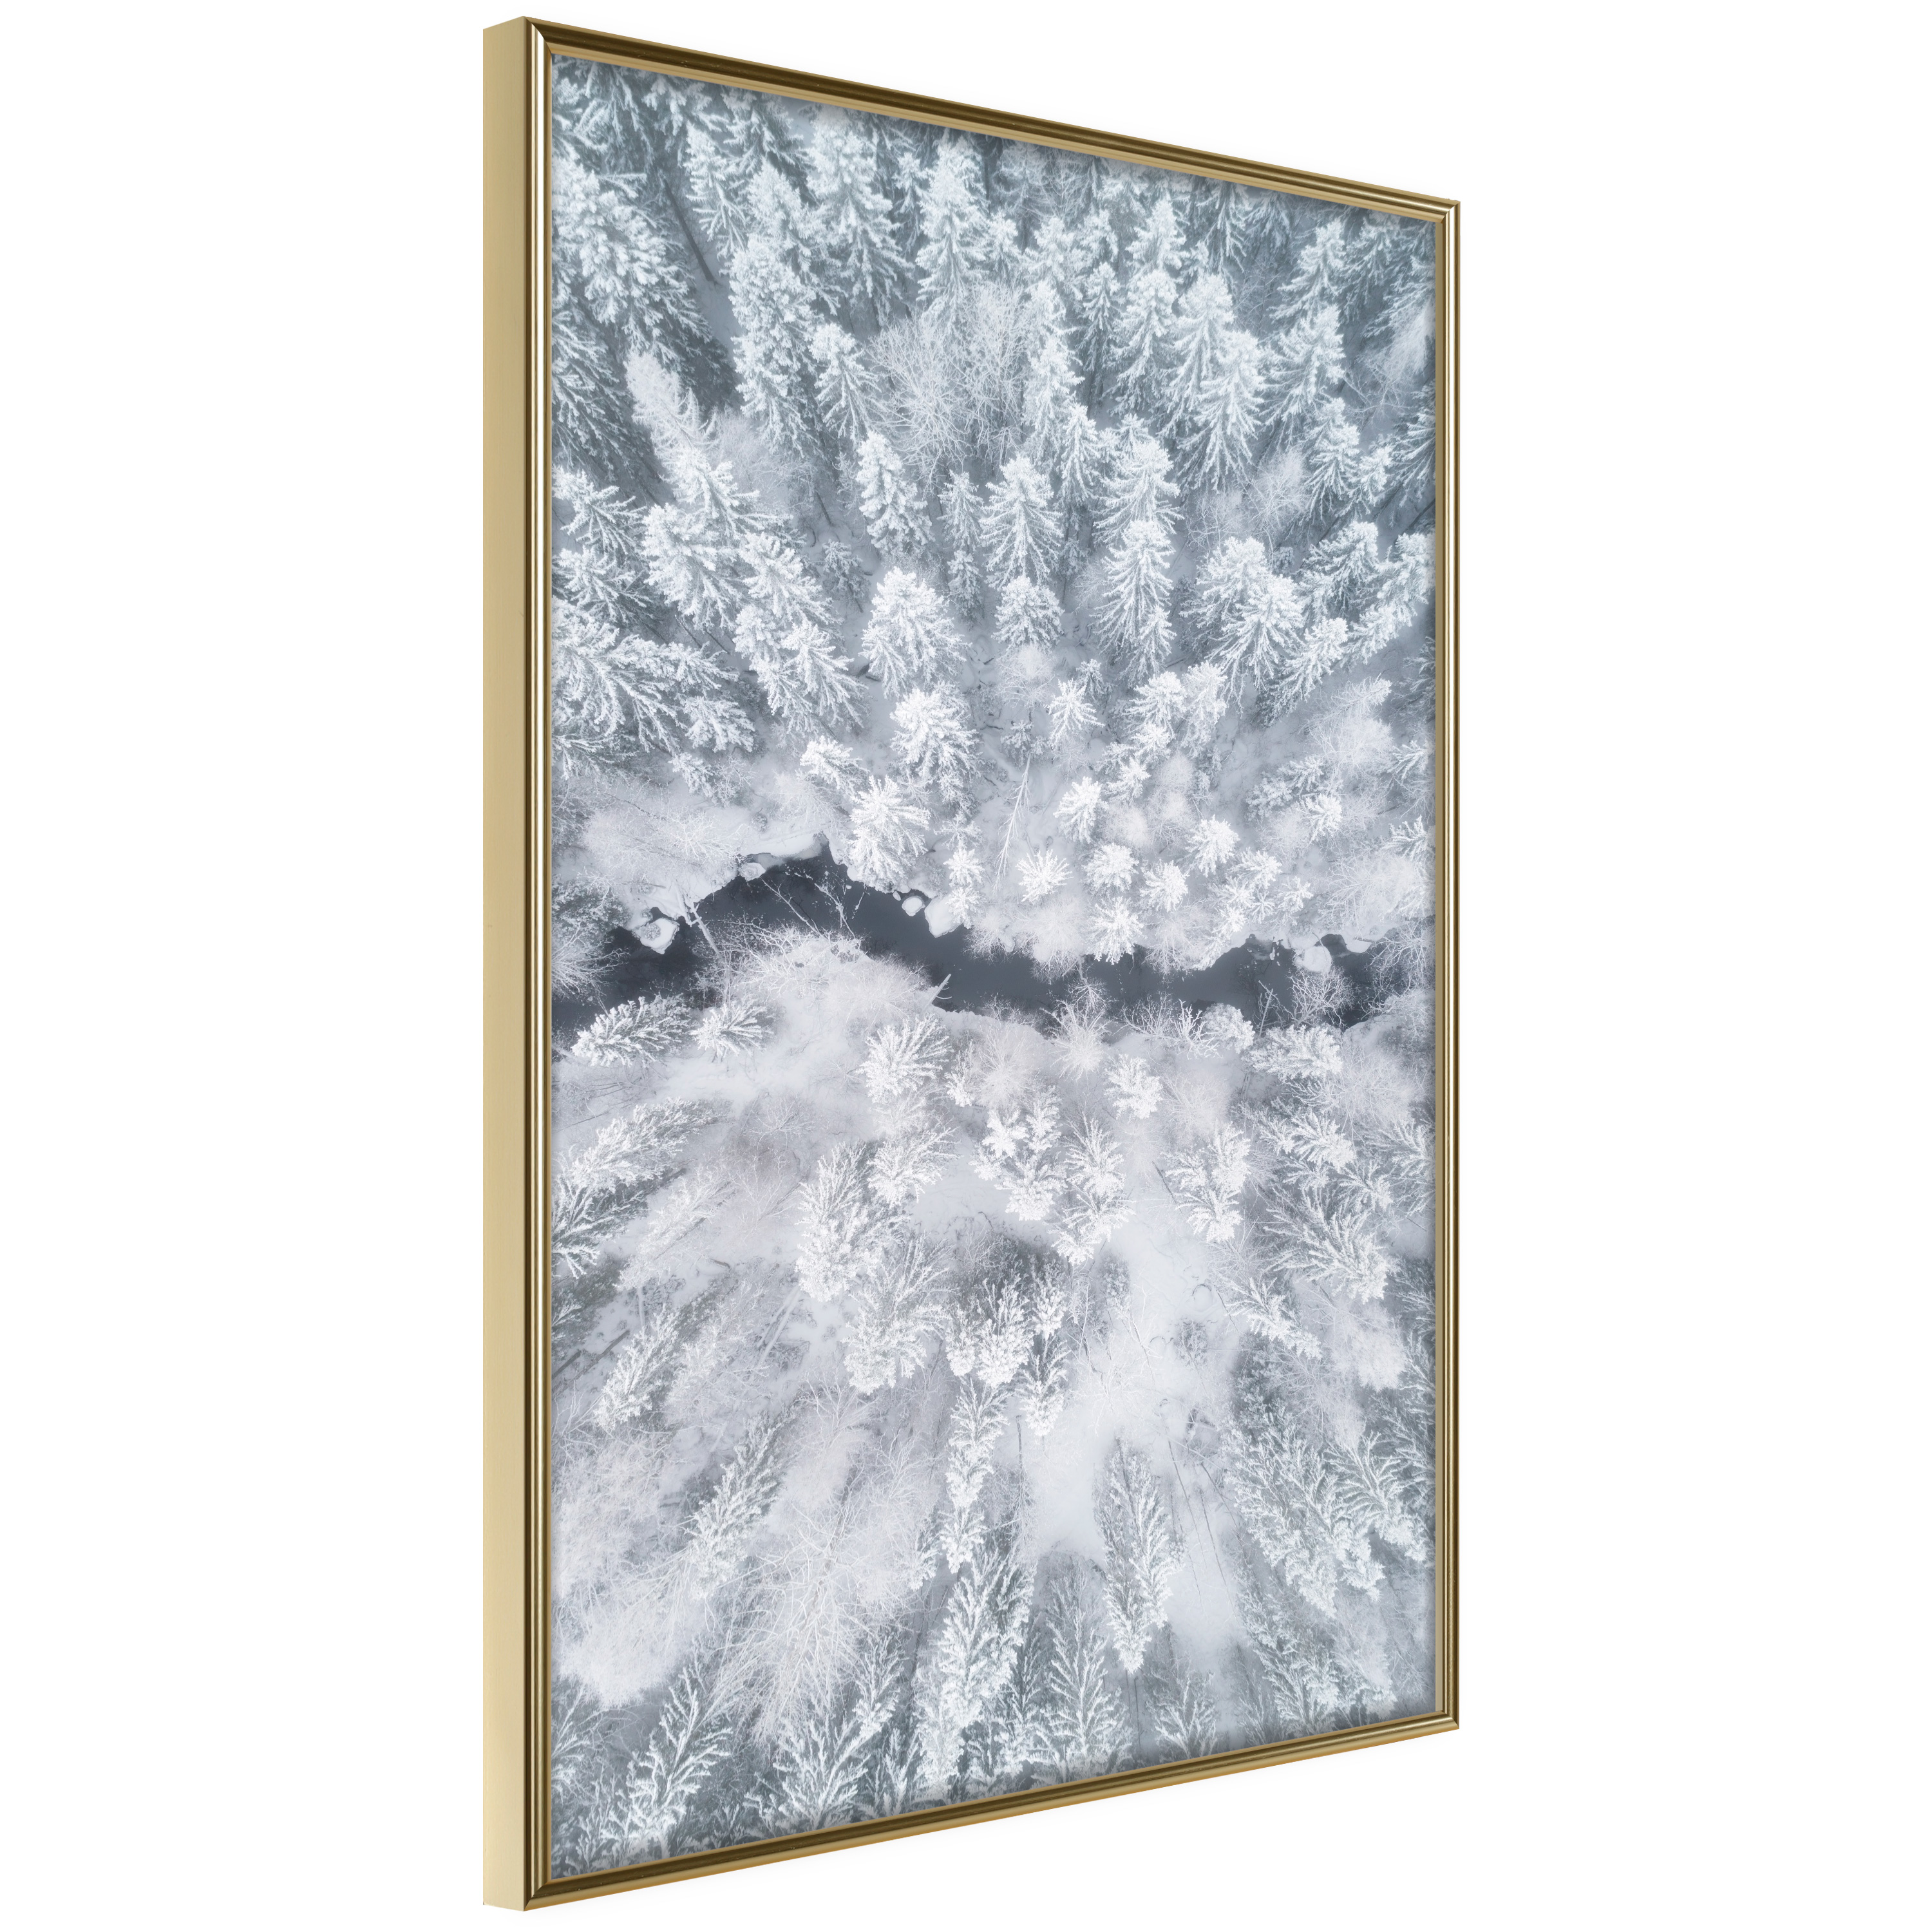 Poster - Winter Forest From a Bird's Eye View - 40x60